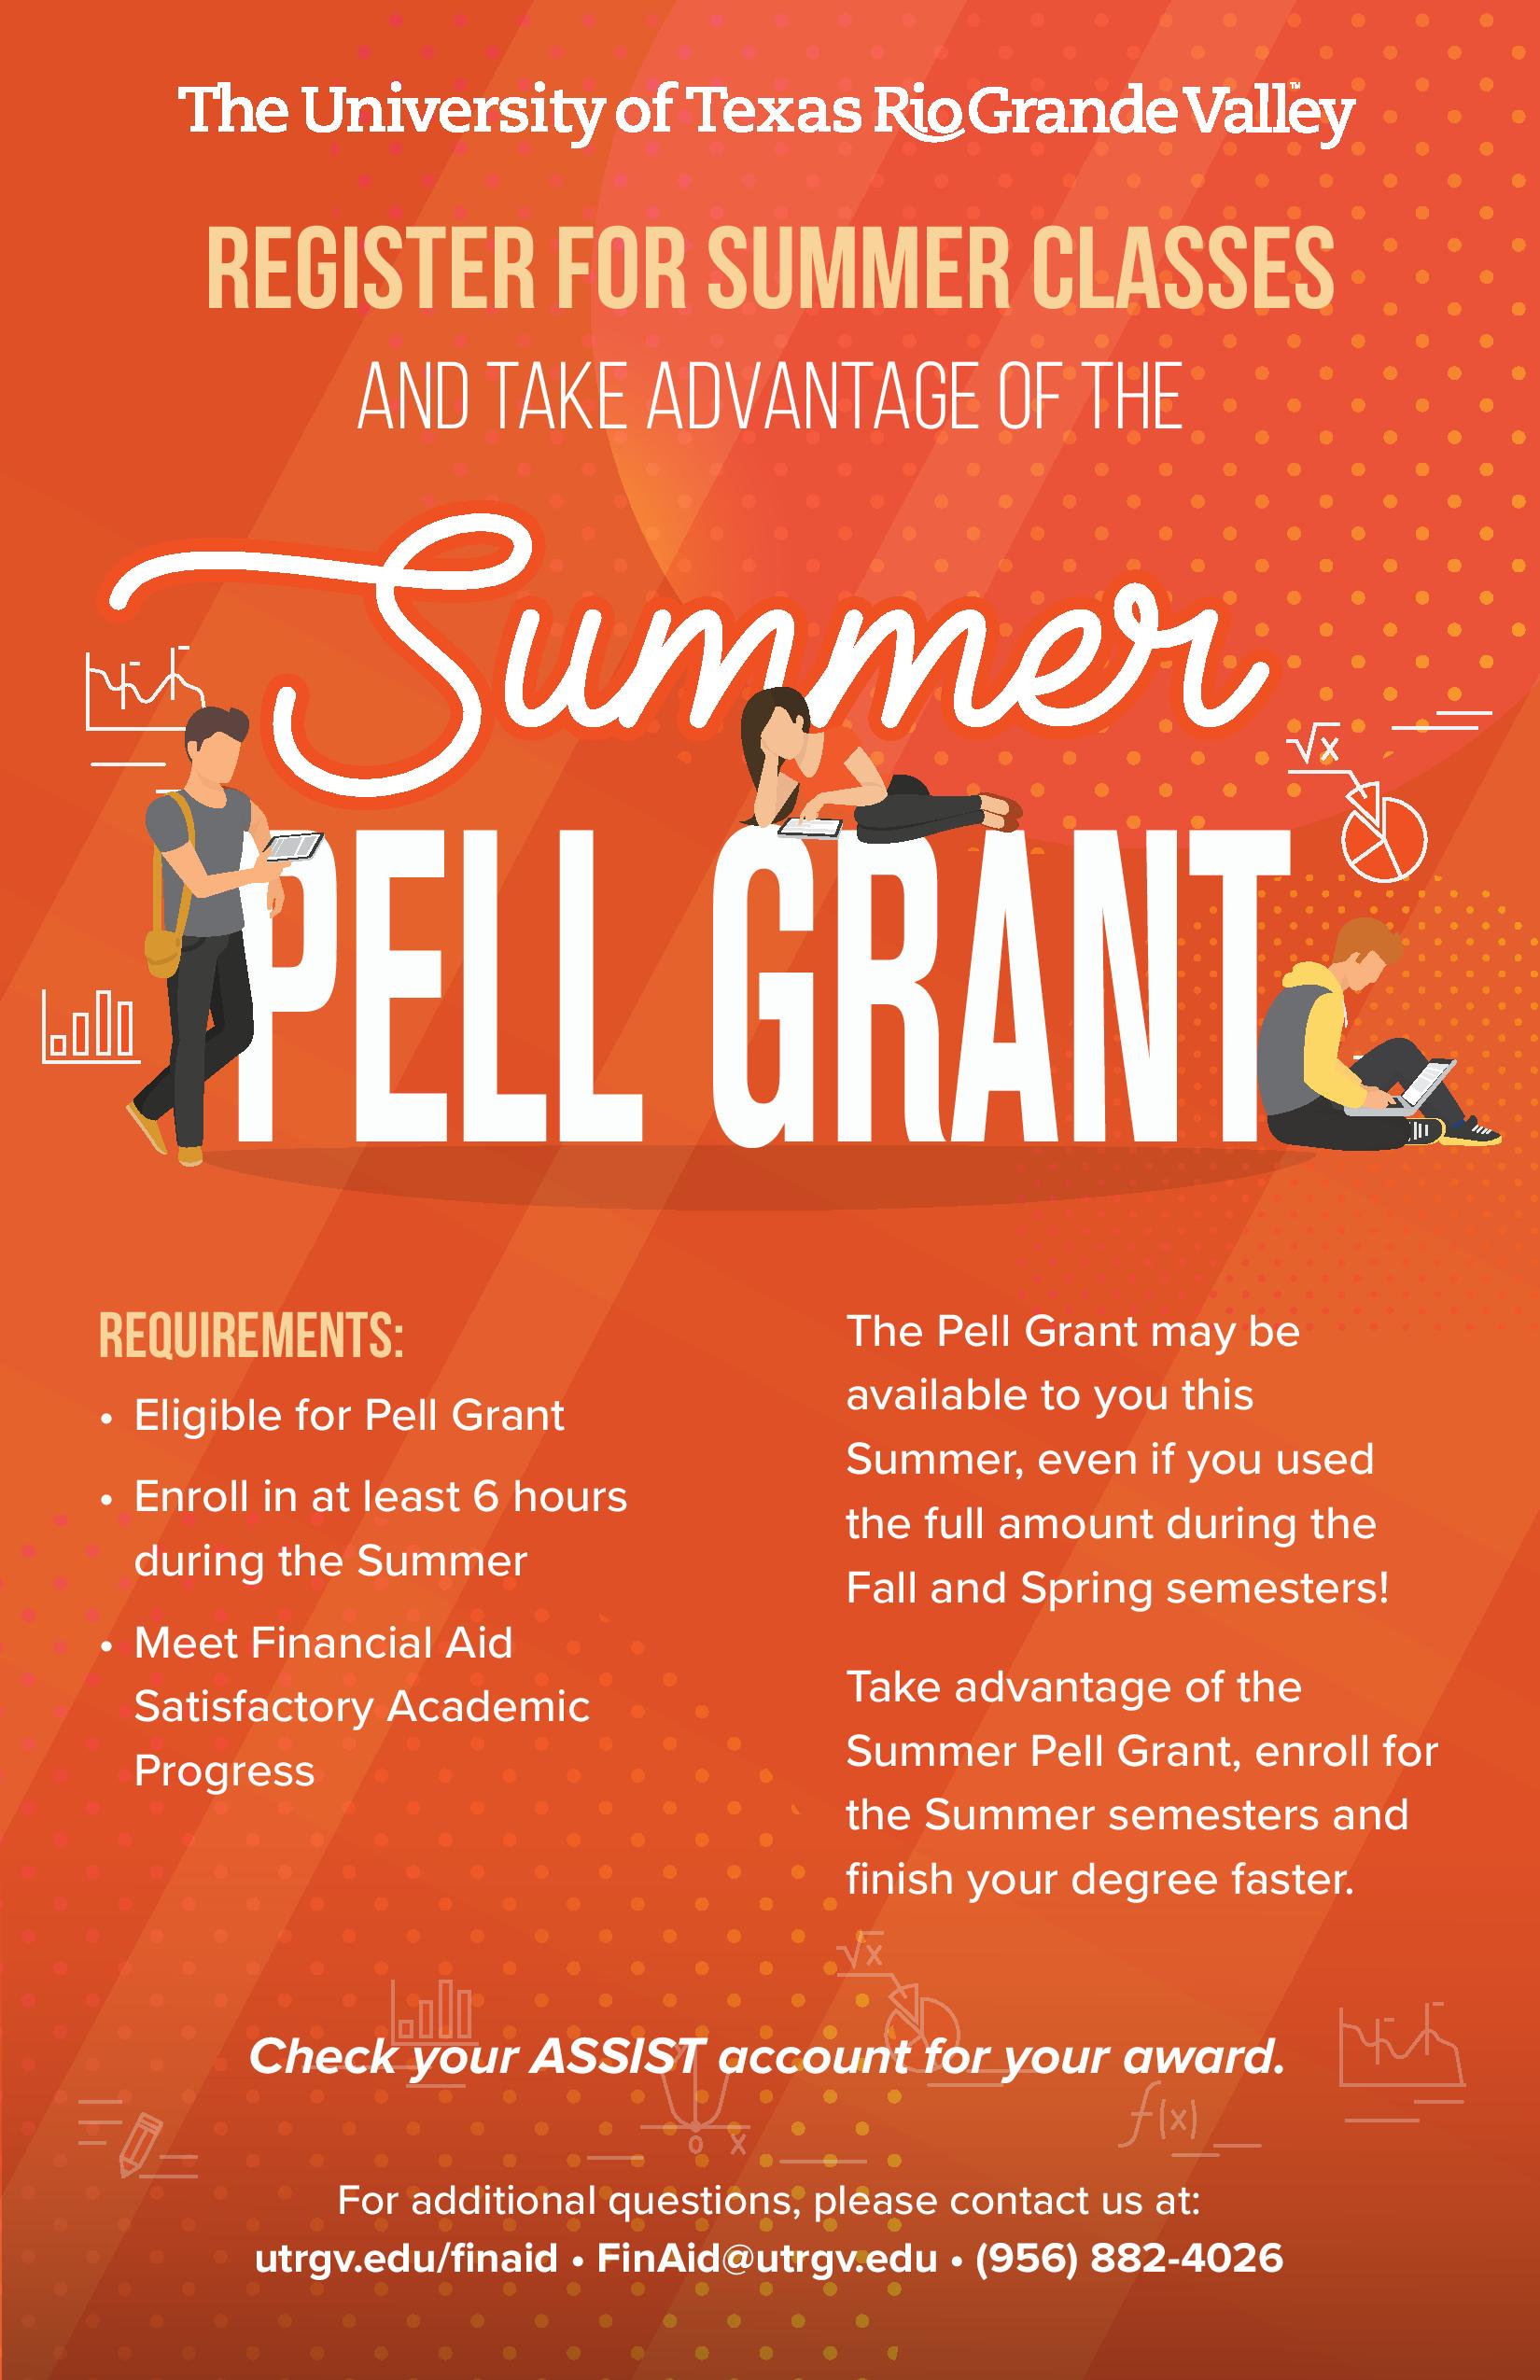 Register for summer classes and take advantage of the pell grant